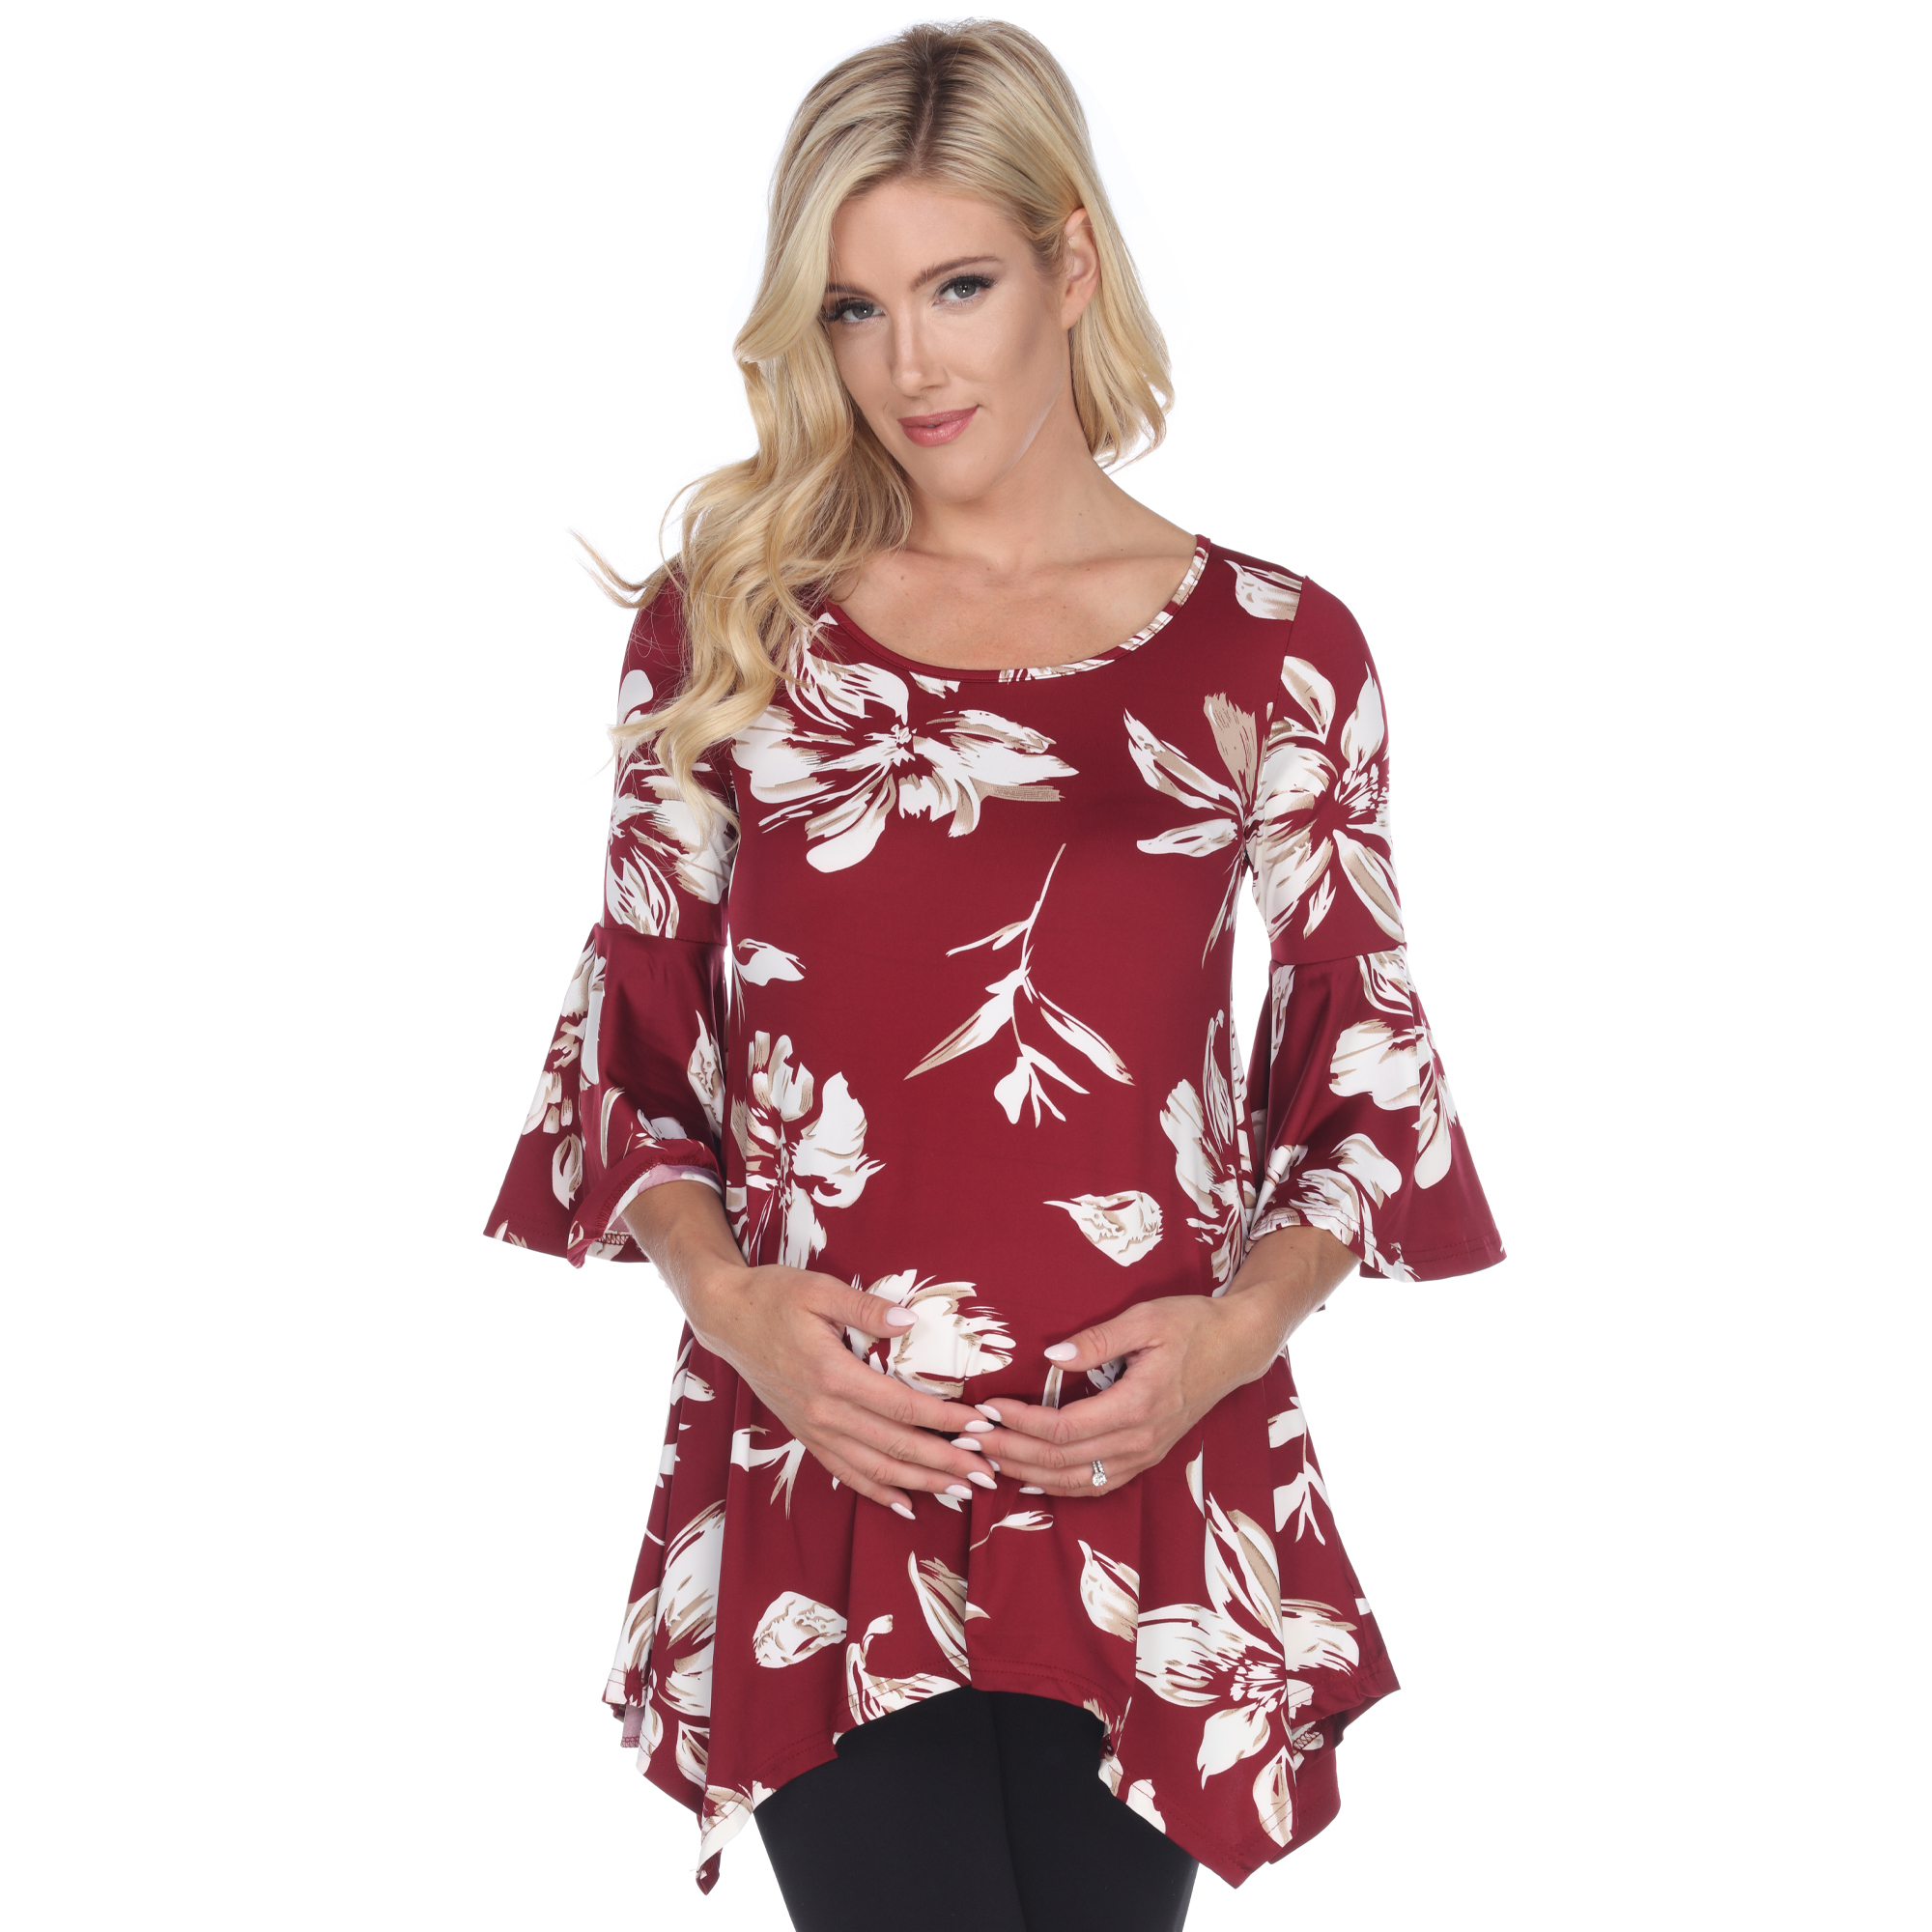 White Mark Women's Maternity Floral Print Quarter Sleeve Tunic Top With Pockets - Red, Large